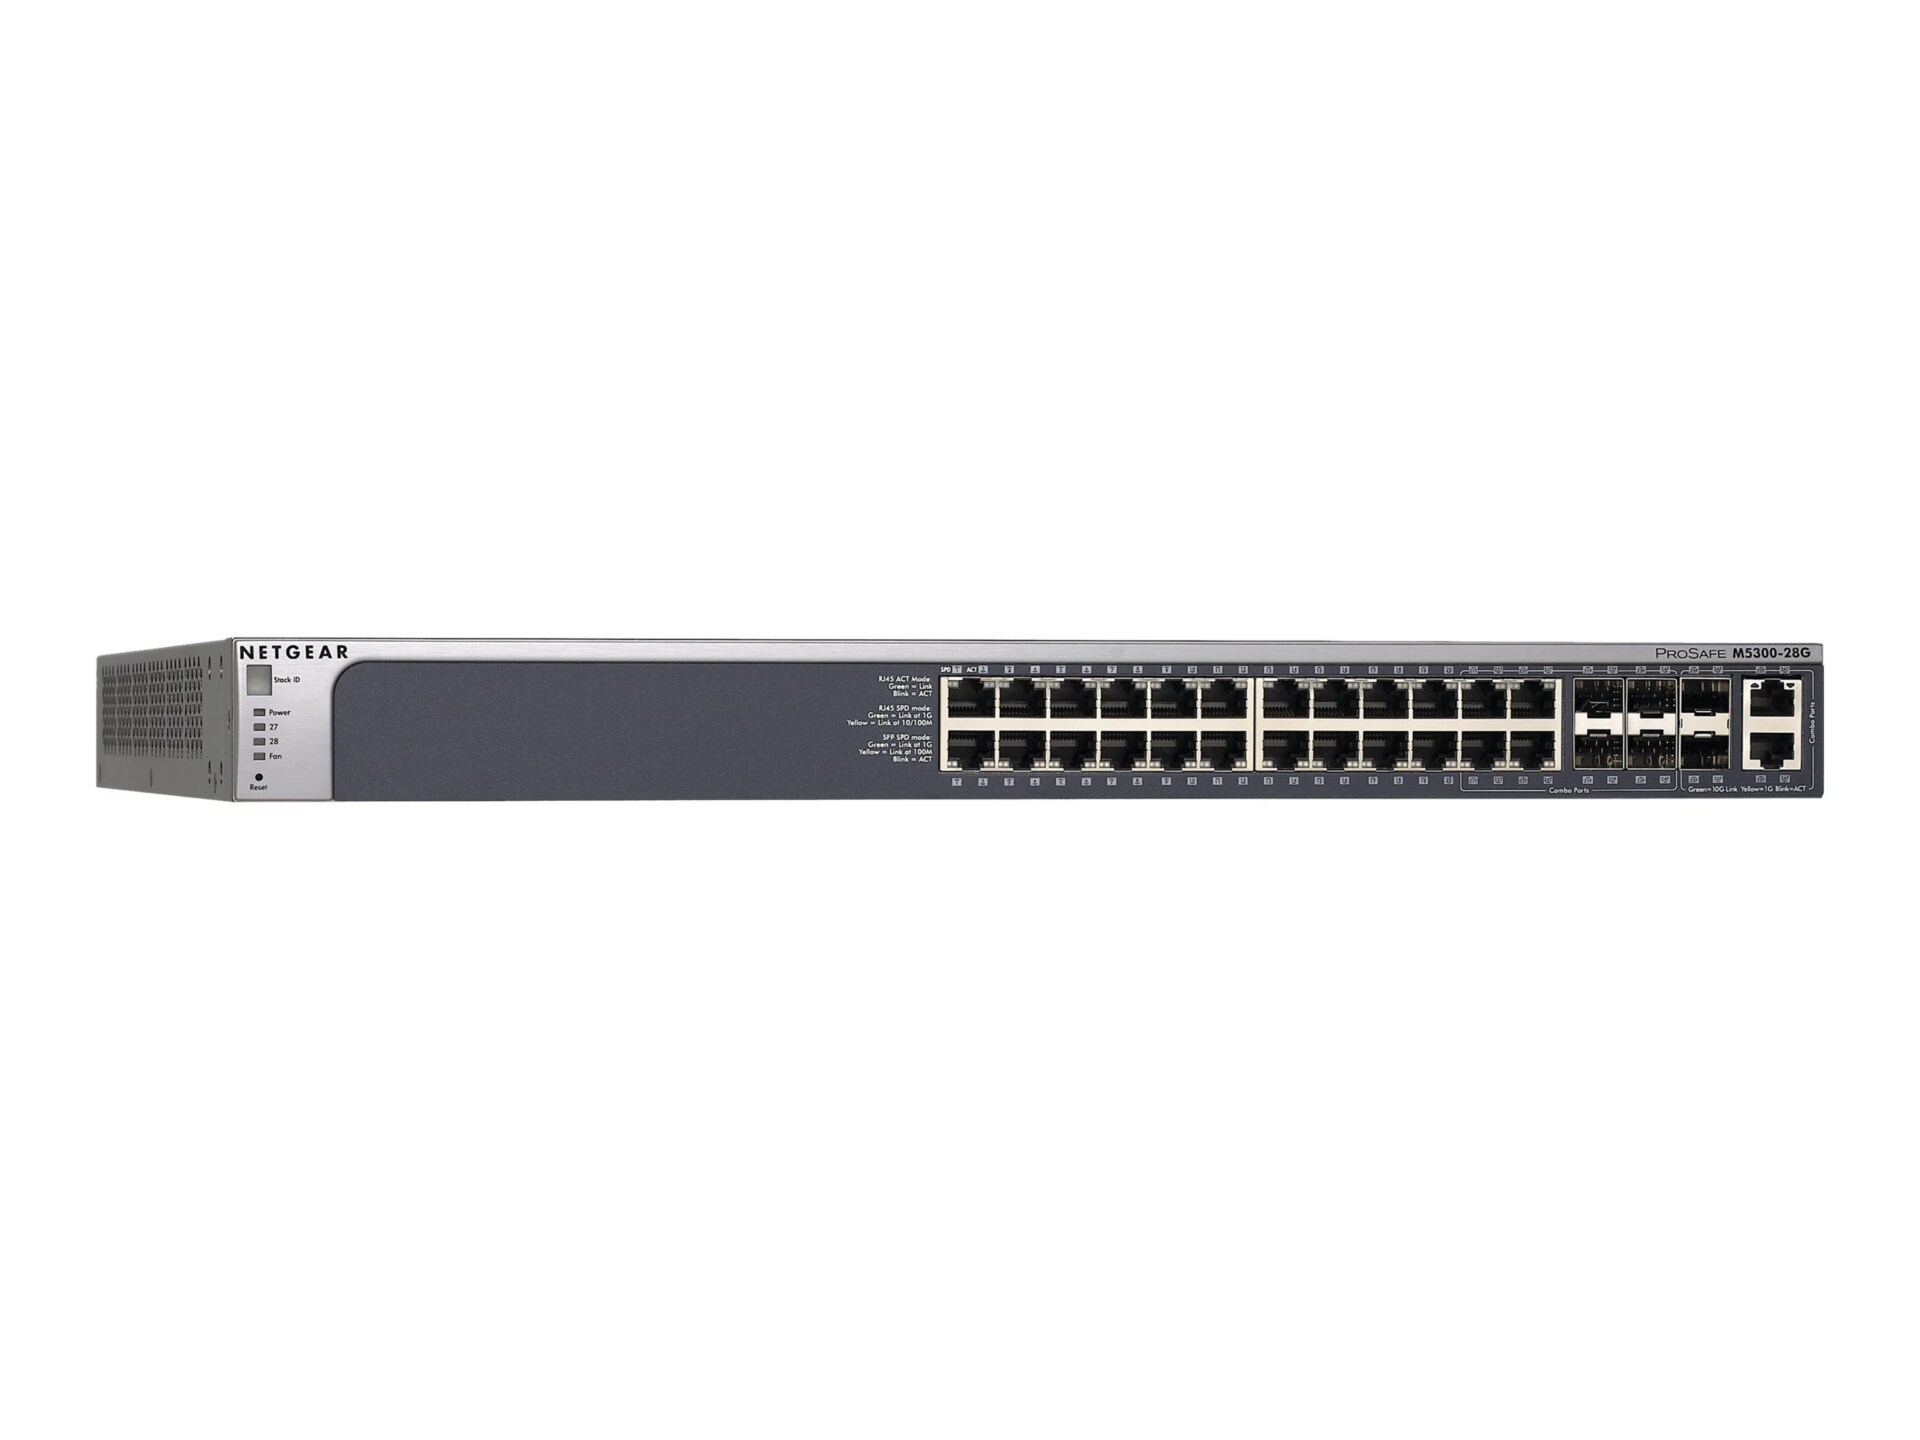 NETGEAR 24-Port Fully Managed Switch M5300/SFP+/10GBASE-T/L2+ (GSM7228S)